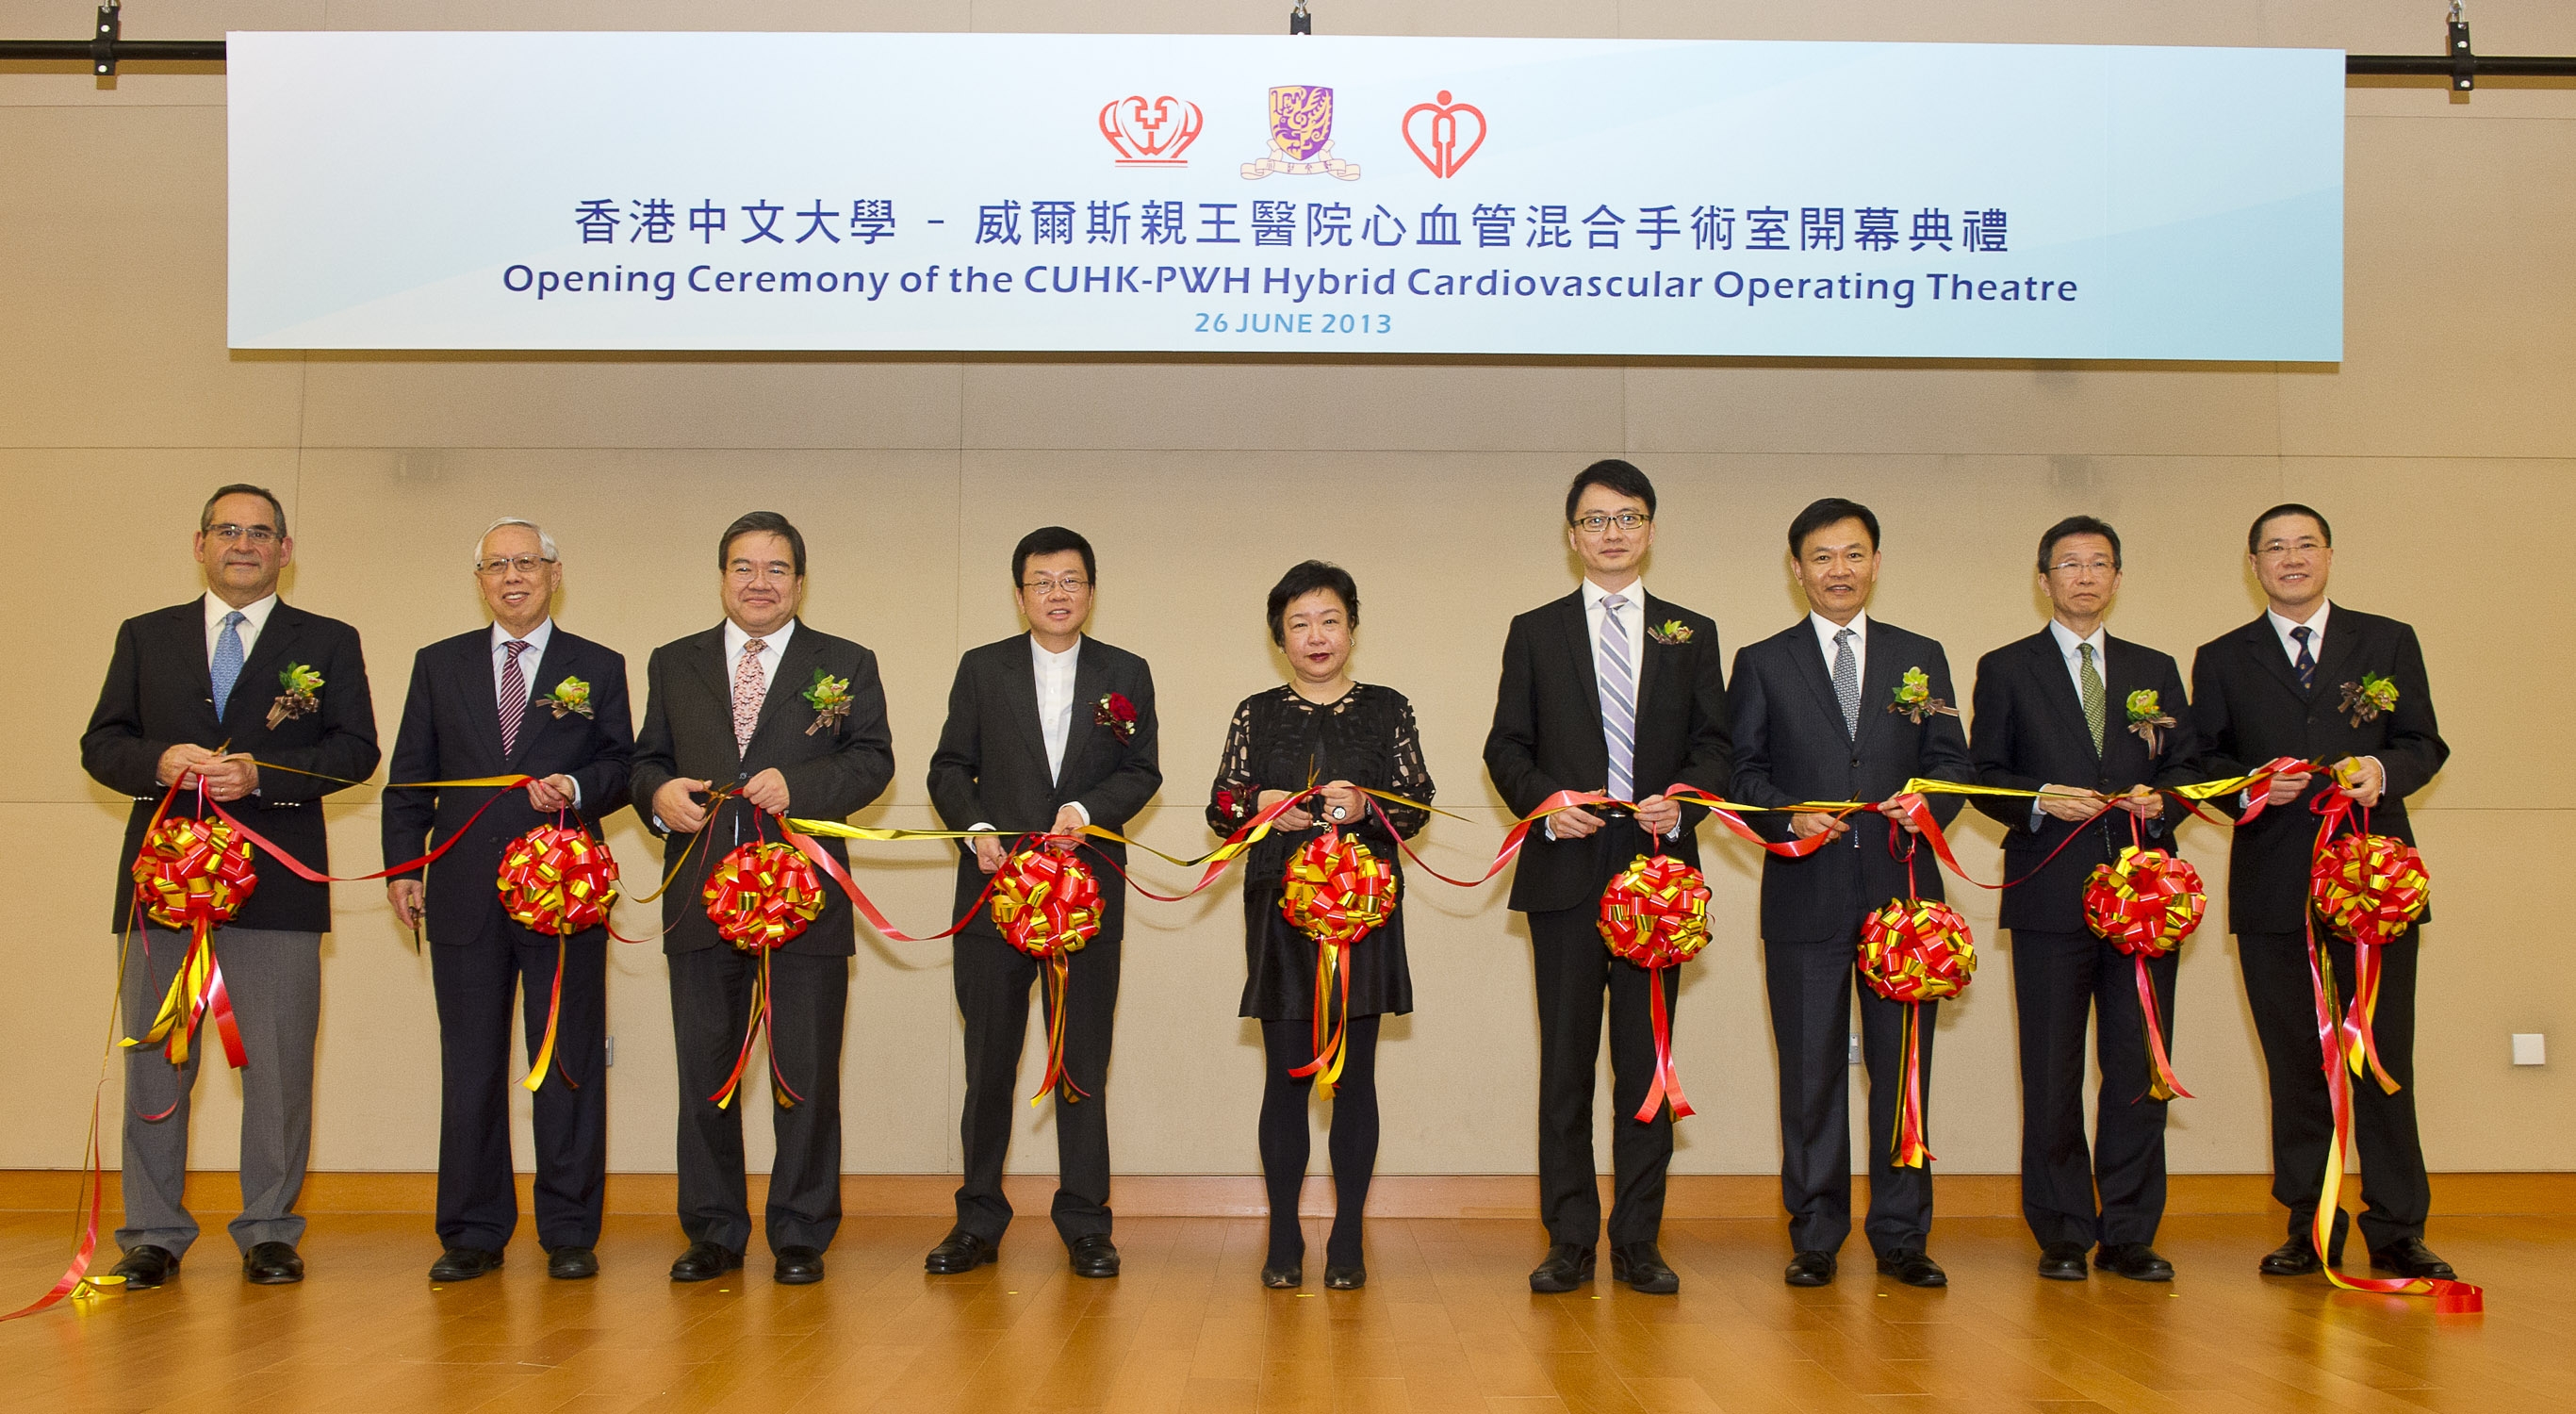 (from left) Prof. C.A. van Hasselt, Chairman, Department of Otorhinolaryngology, Head and Neck Surgery, CUHK; Mr. Edward Ho, Chairman of the Hospital Governing Committee, Prince of Wales Hospital; Mr. Anthony Wu, Chairman, Hospital Authority (HA); Mr. Raymond Yim Chun-man and Ms. Grace Fong Yin-cheung, representatives of the donor; Prof. Francis K.L. Chan, Dean of Medicine, CUHK; Dr. Leung Pak Yin, HA Chief Executive; Dr. Fung Hong, Cluster Chief Executive, New Territories East Cluster; and Prof. Paul B.S. Lai, Chairman, Department of Surgery, CUHK